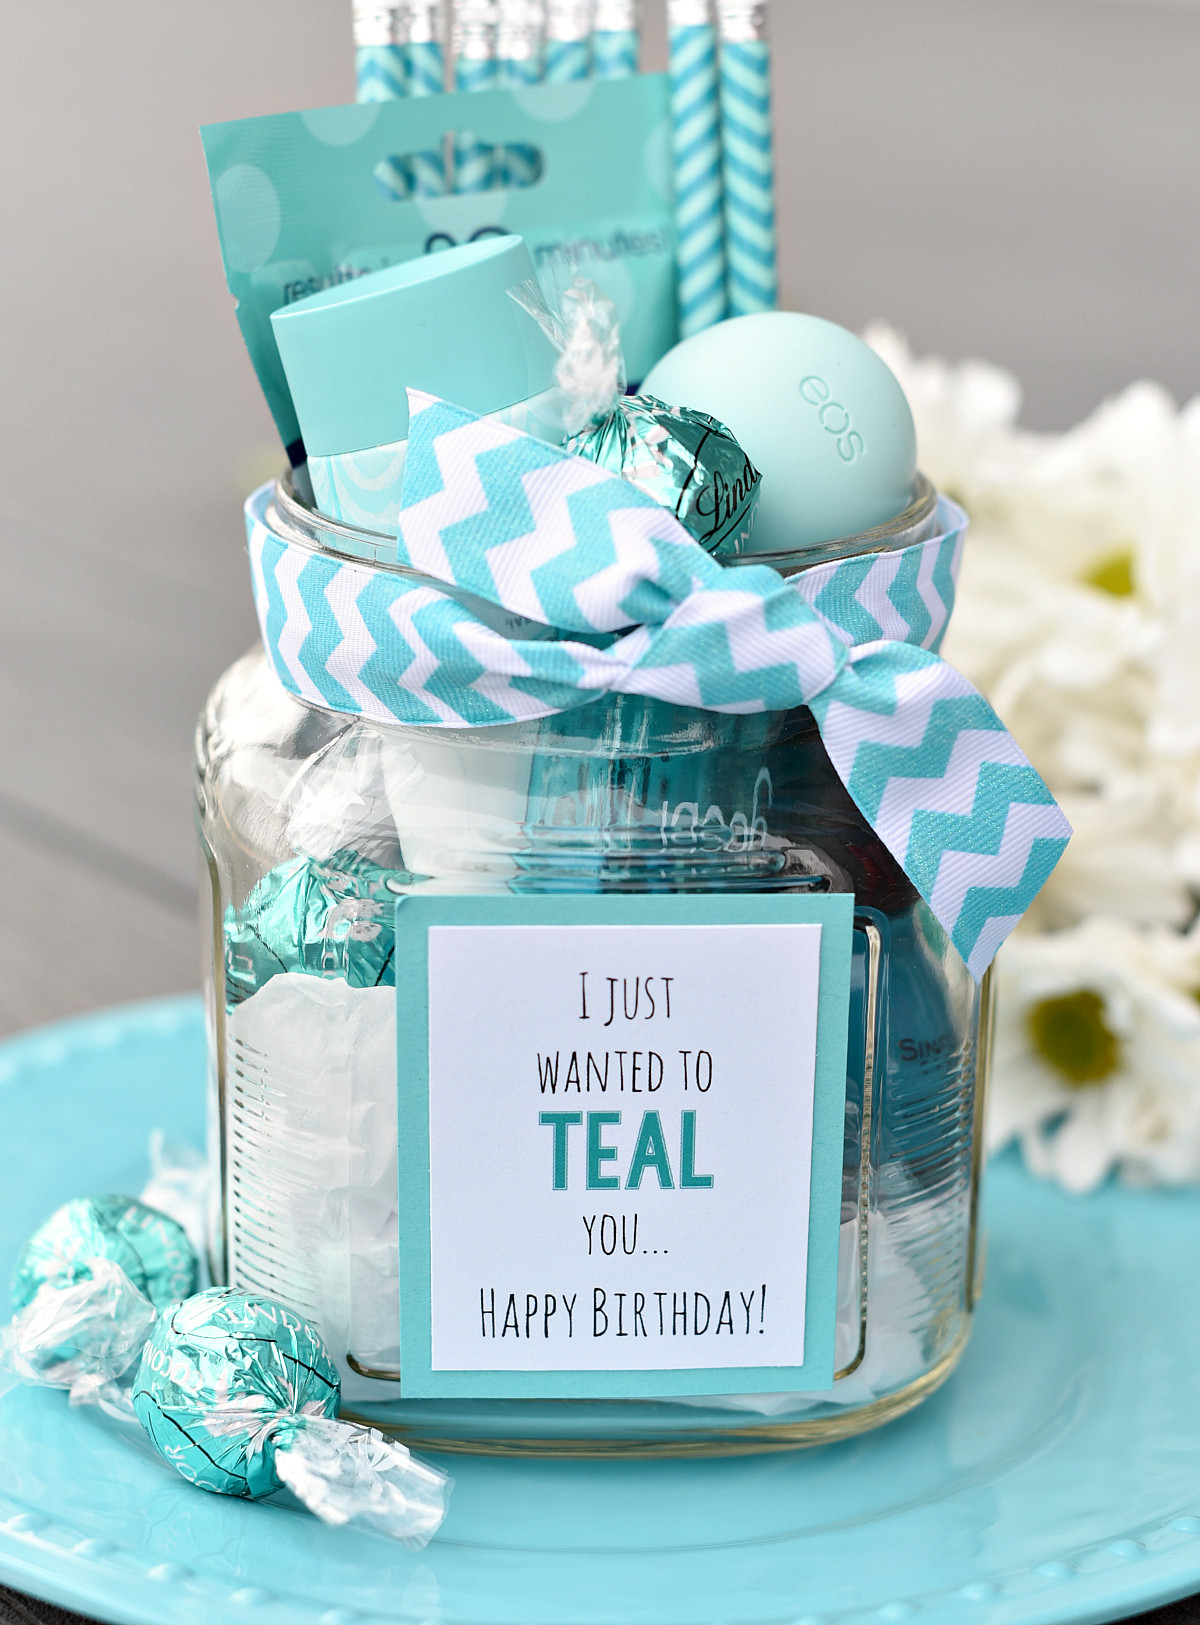 Birthday Gift For Her Ideas
 Teal Birthday Gift Idea for Friends – Fun Squared